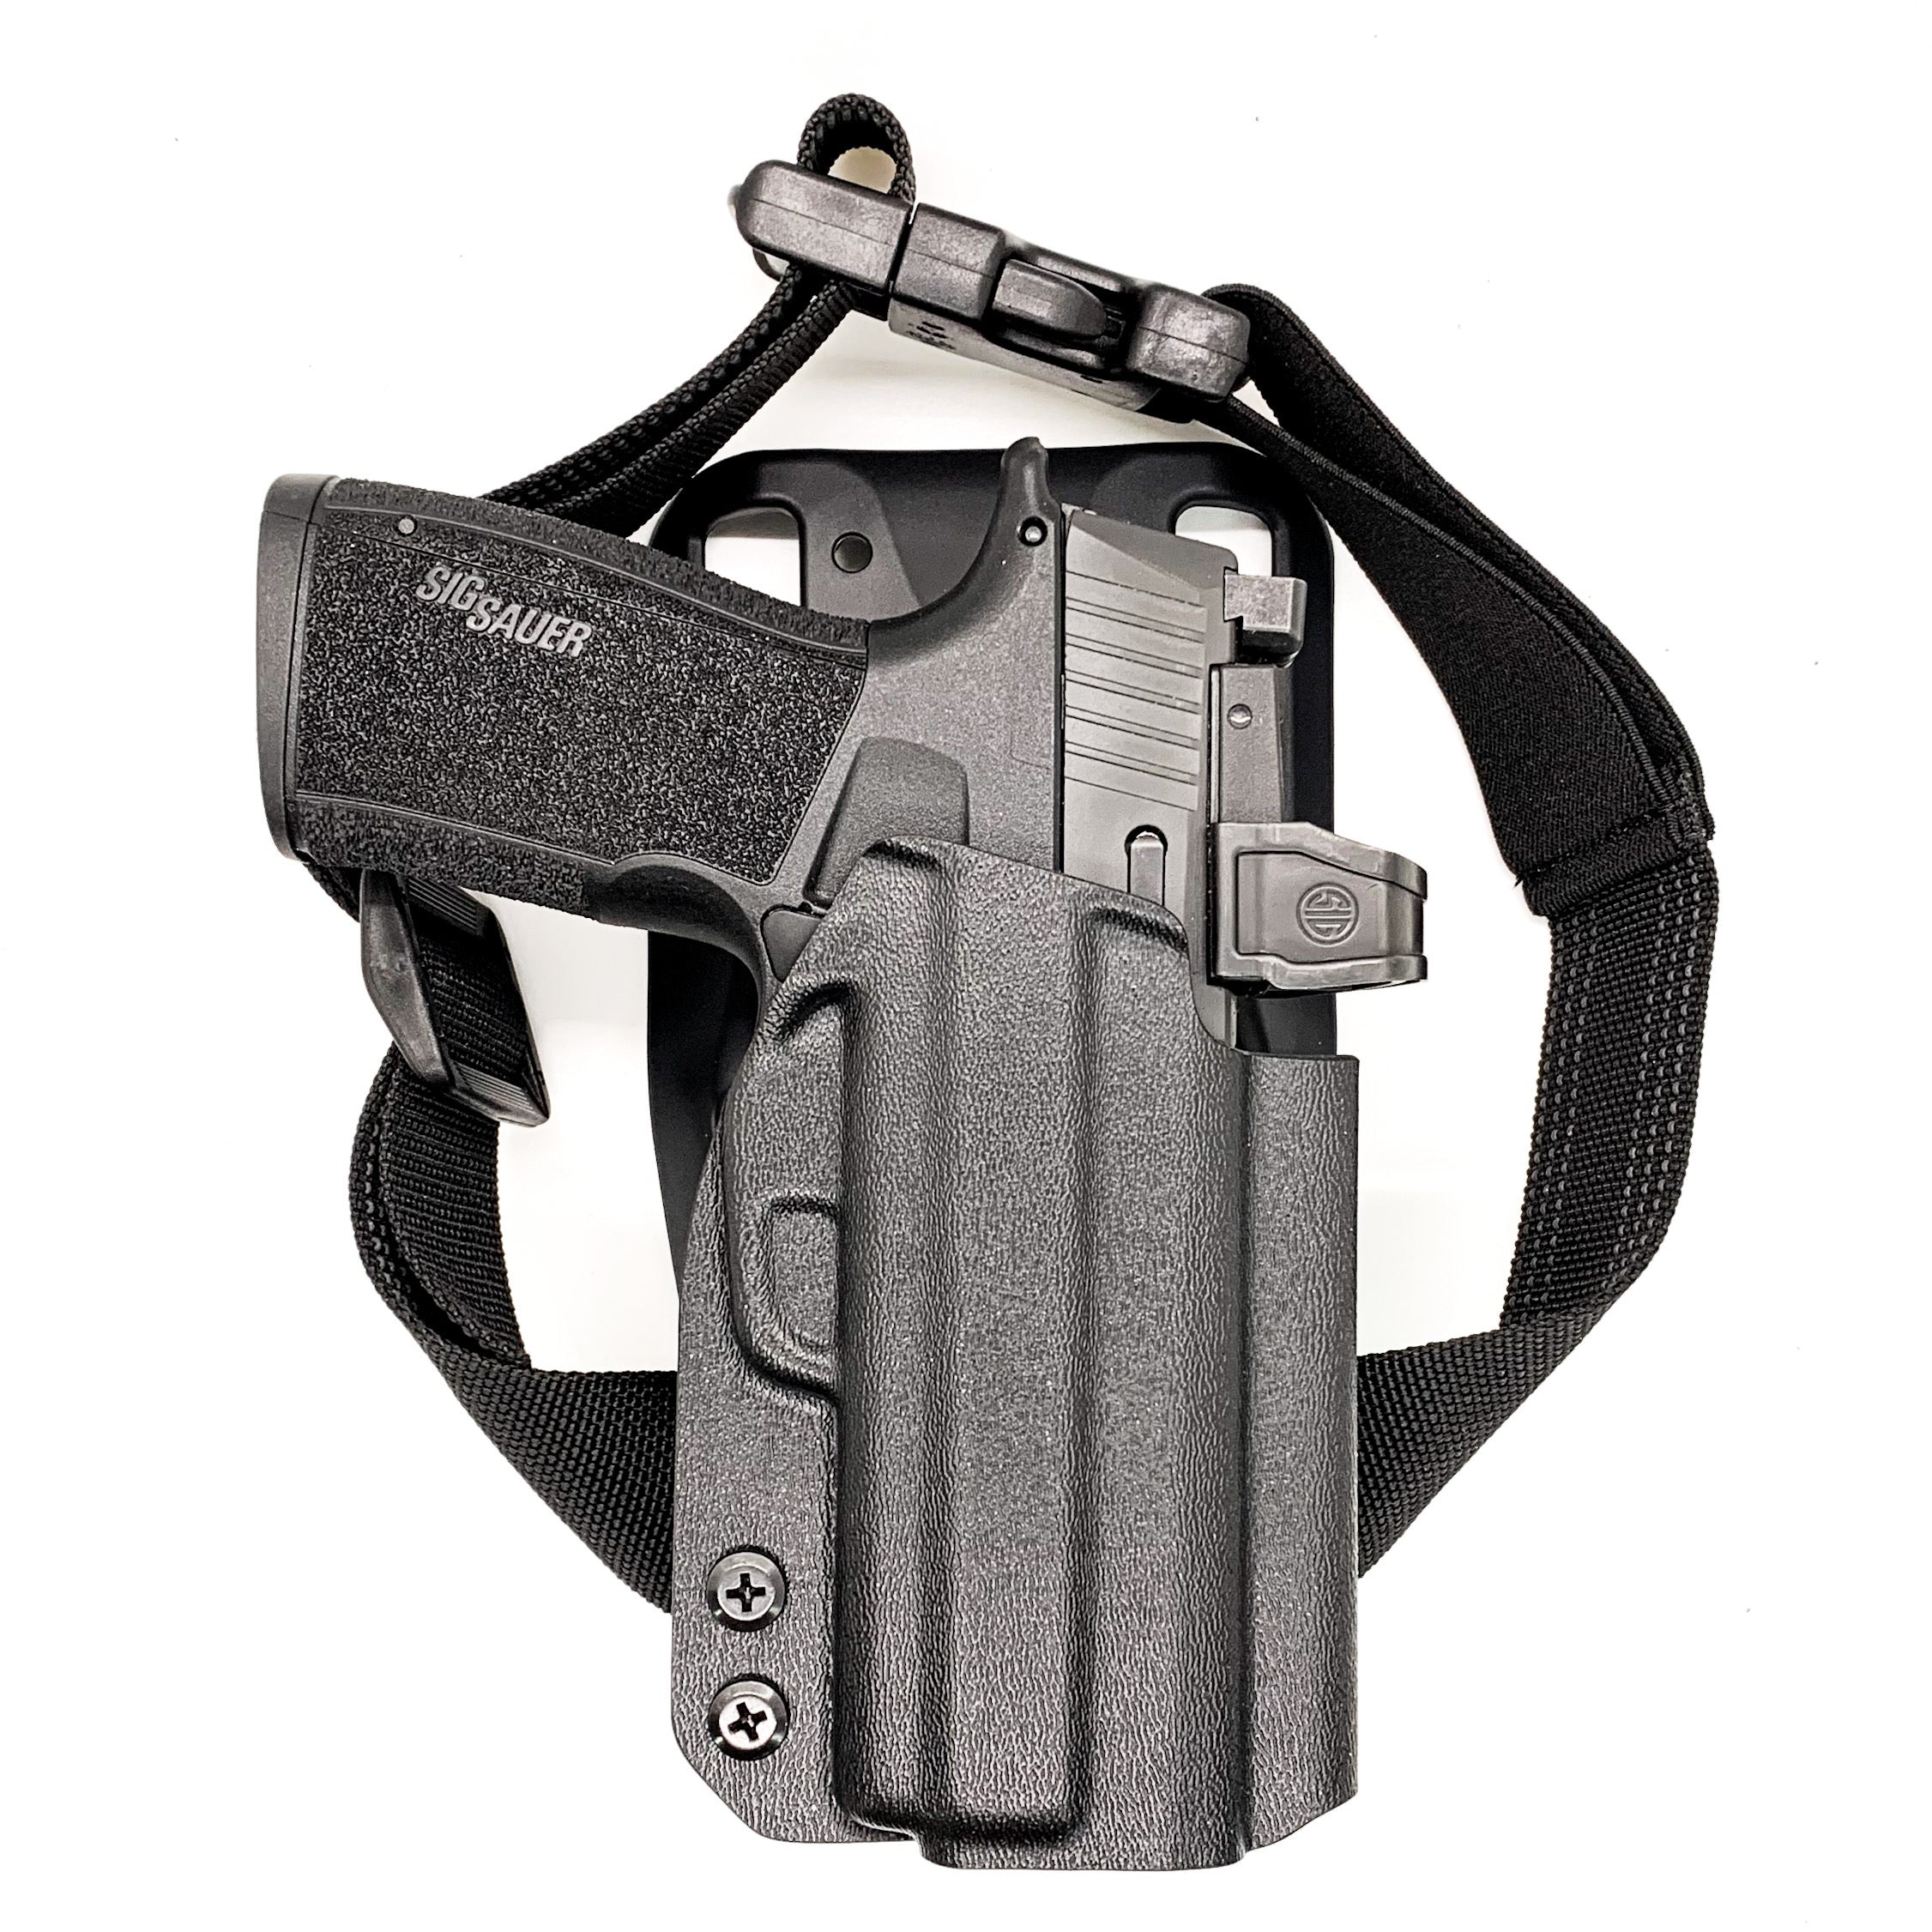 For the best Outside Waistband Duty & Competition Kydex Holster designed to fit the Sig Sauer P365-XMACRO, P365-XMACRO COMP, P365-XMACRO TACOPS, and P365-XMACRO COMP ROMEOZERO ELITE with the GoGunsUSA Gas Pedal shop Four Brothers Holsters.  Full sweat guard, adjustable retention, open muzzle, cleared for red dot sight